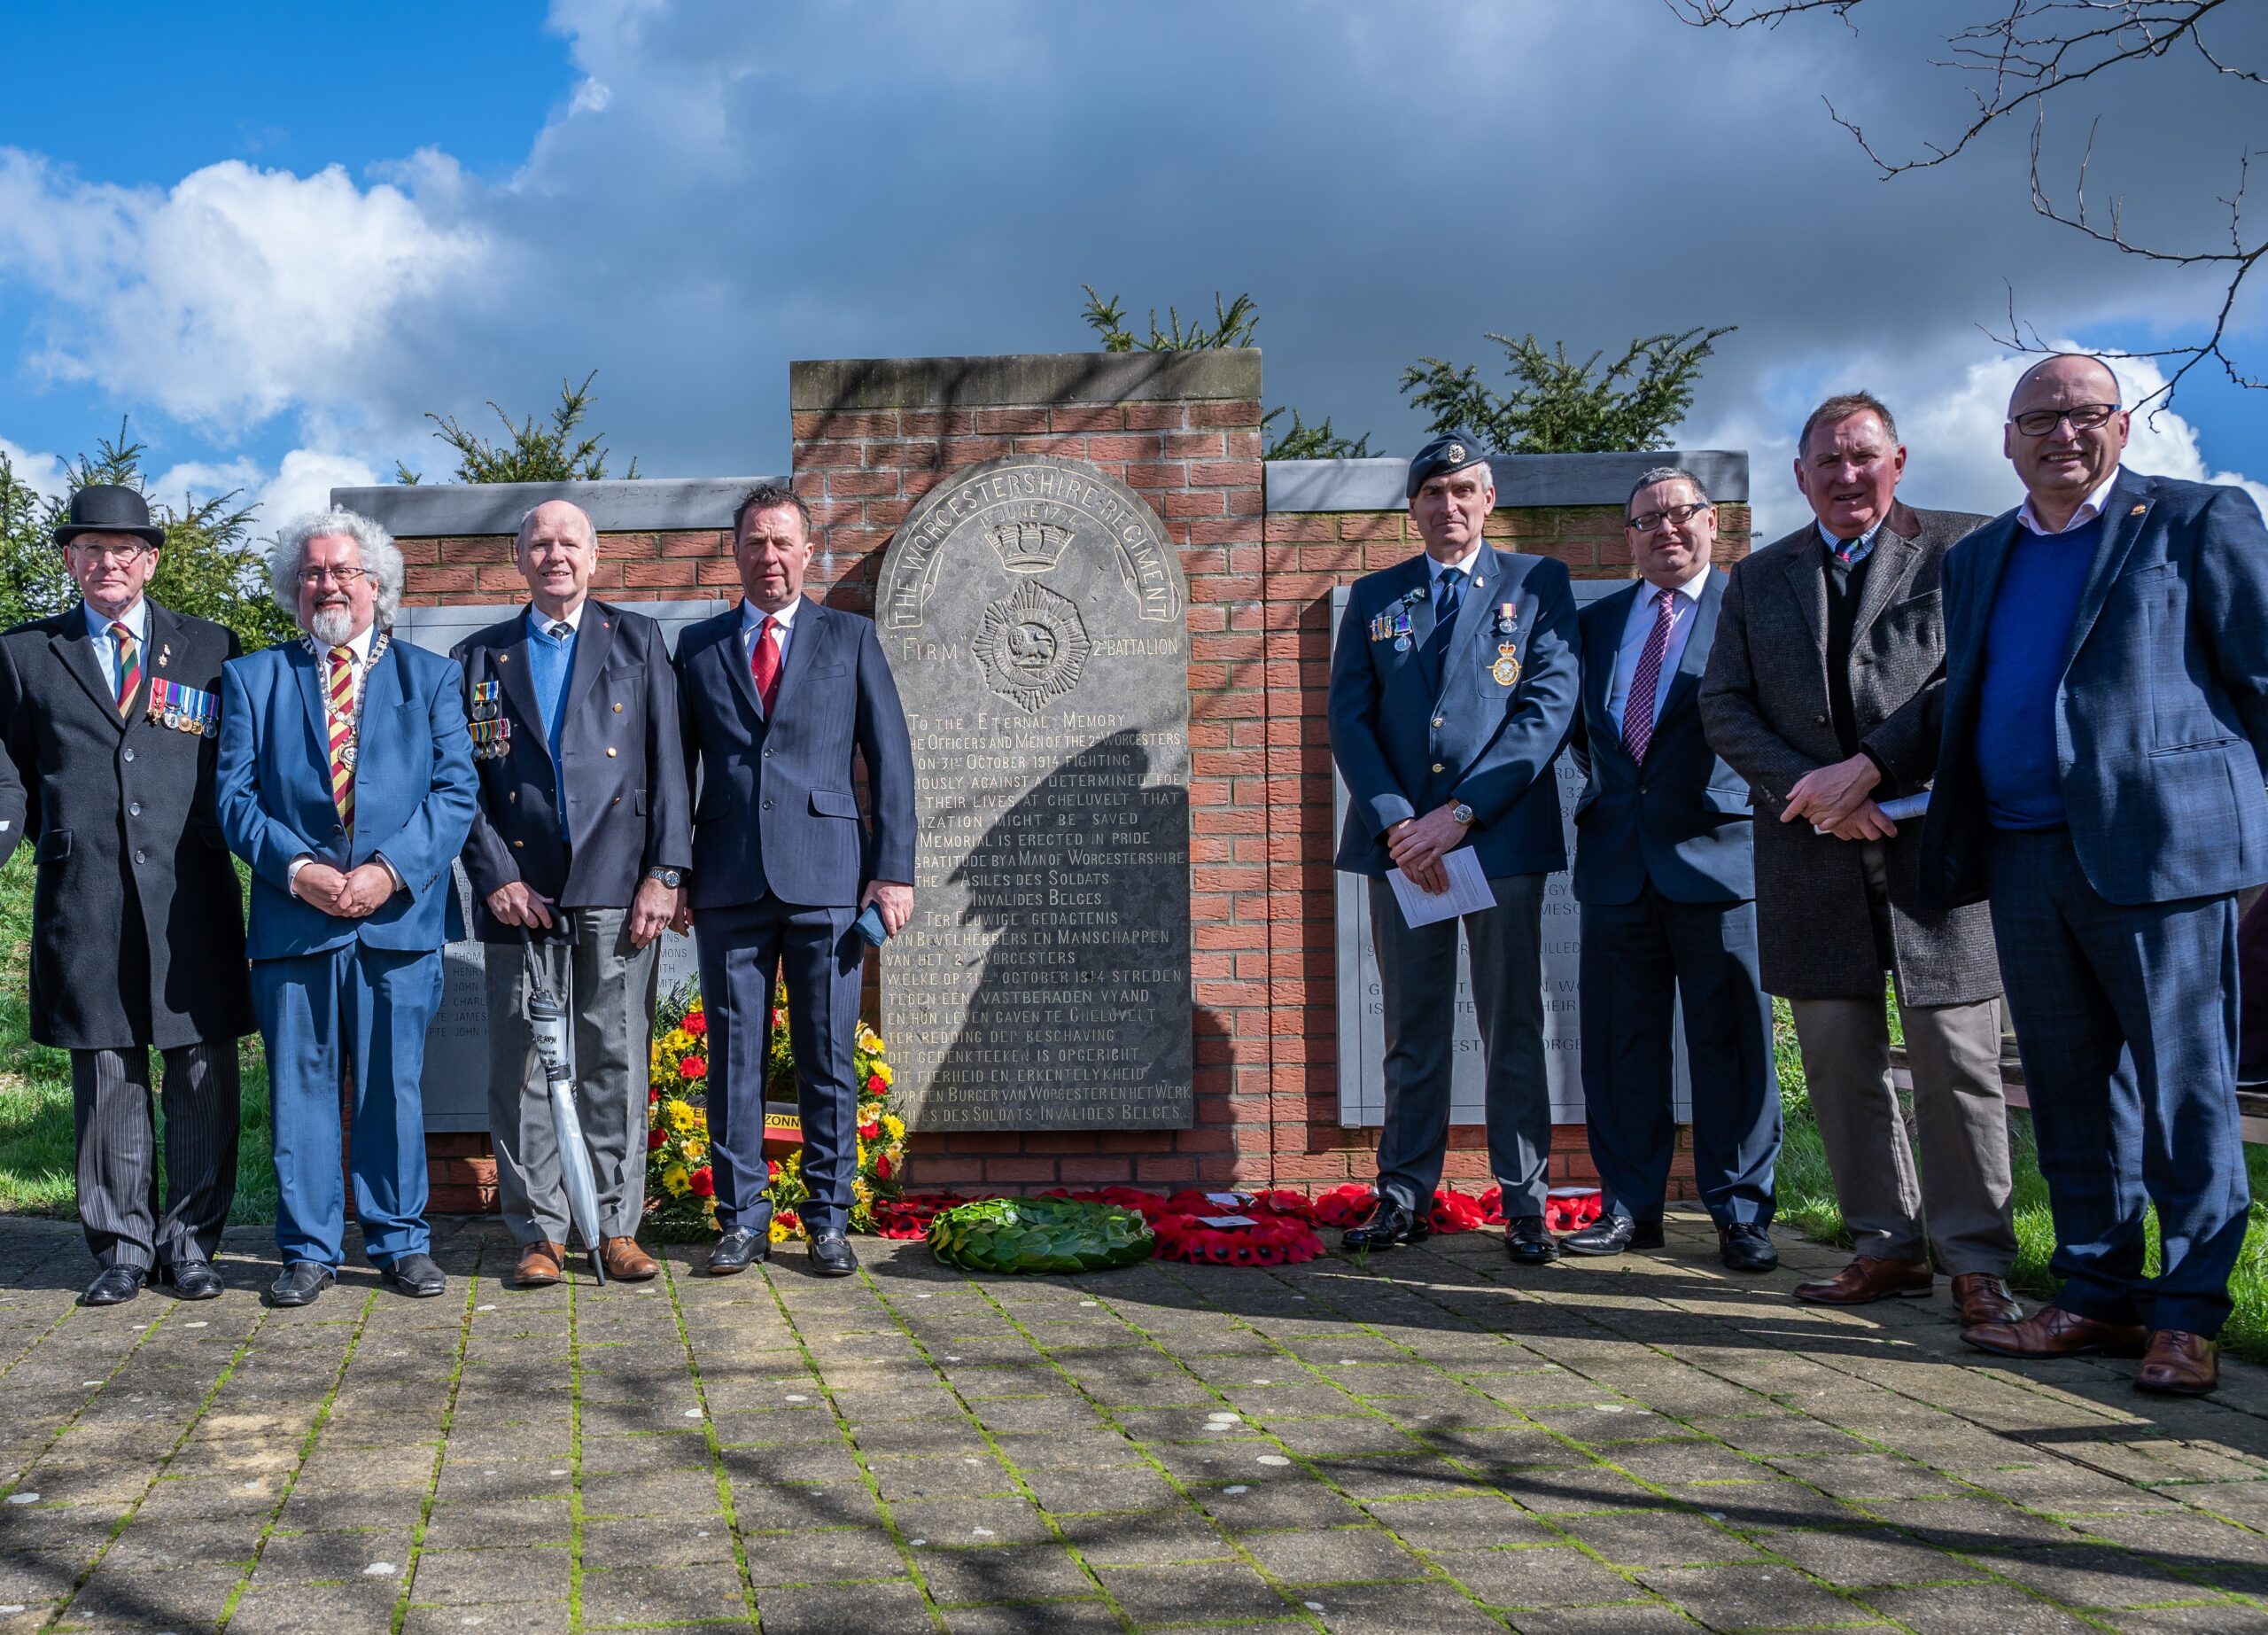 The Mayor (second from left) with the Worcestershire Ambassadors at the expanded and re-dedicated Worcestershire regiment memorial in Geluveld, Zonnebeke. Photo: Eric Compernolle